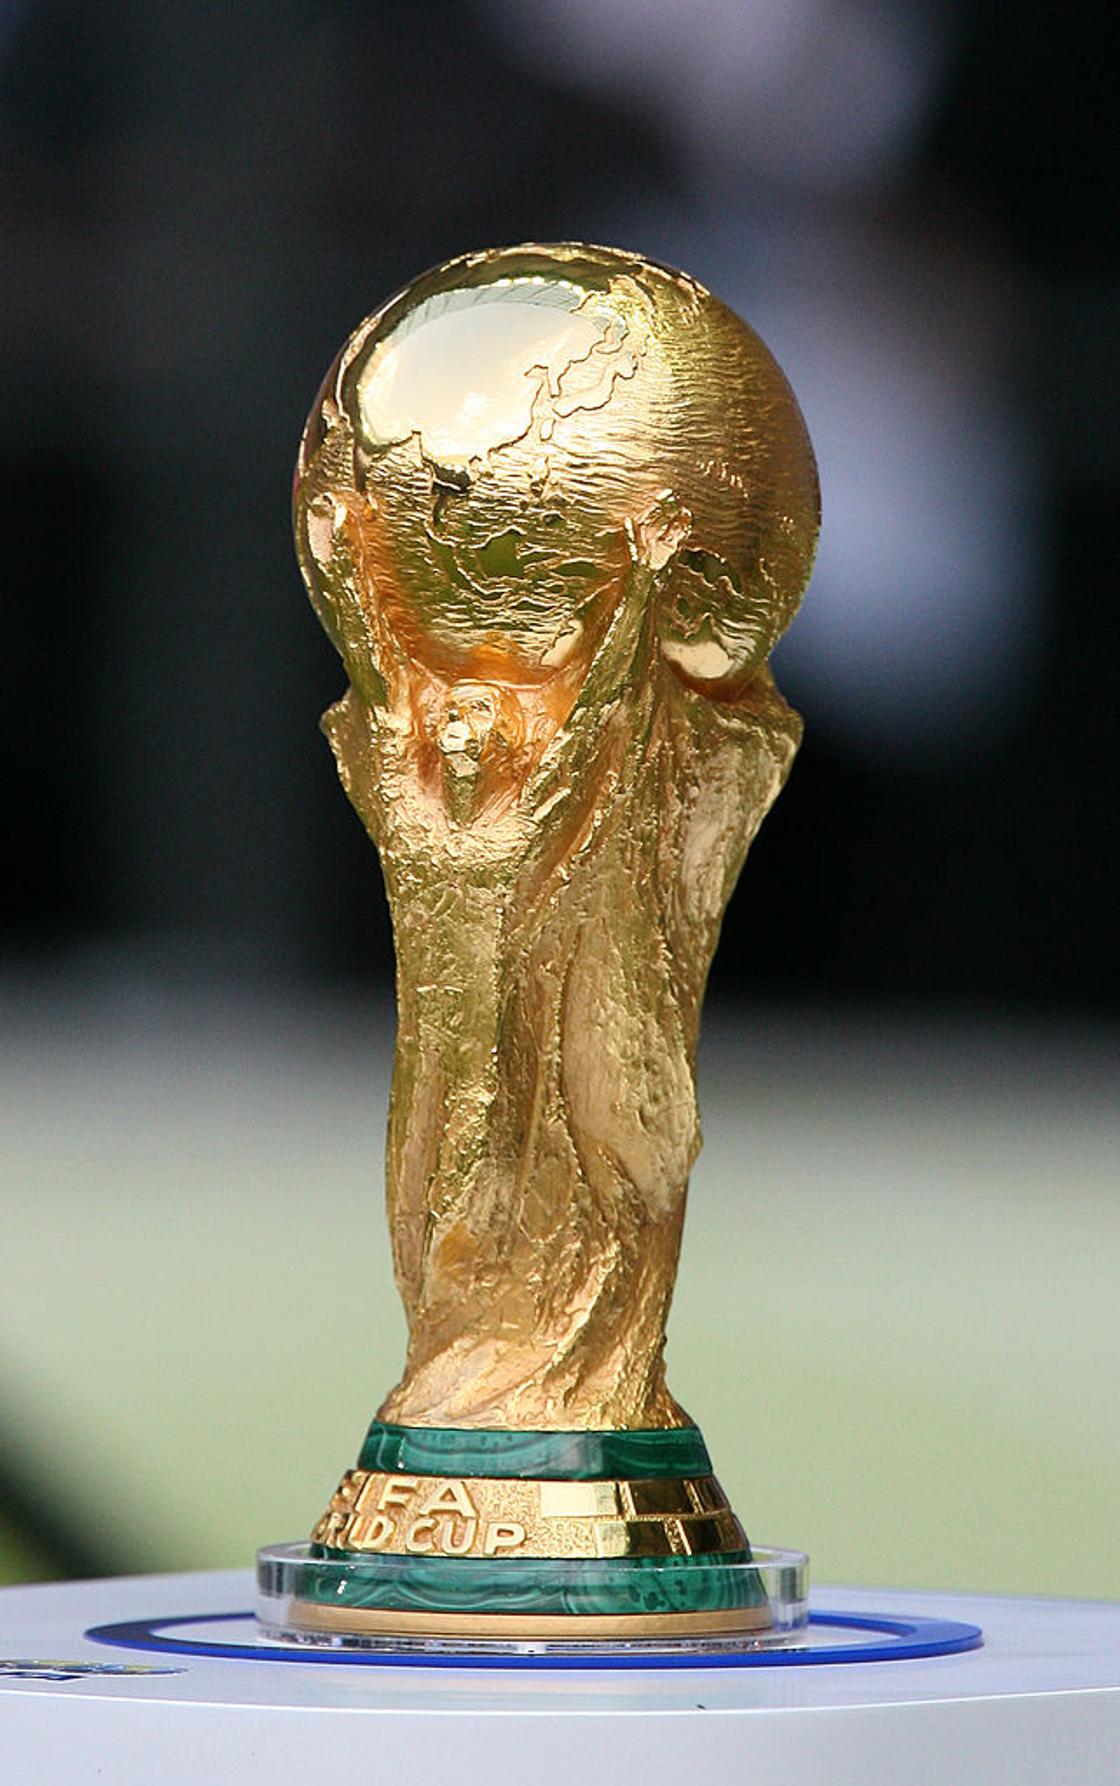 Which country has won the most World Cups?